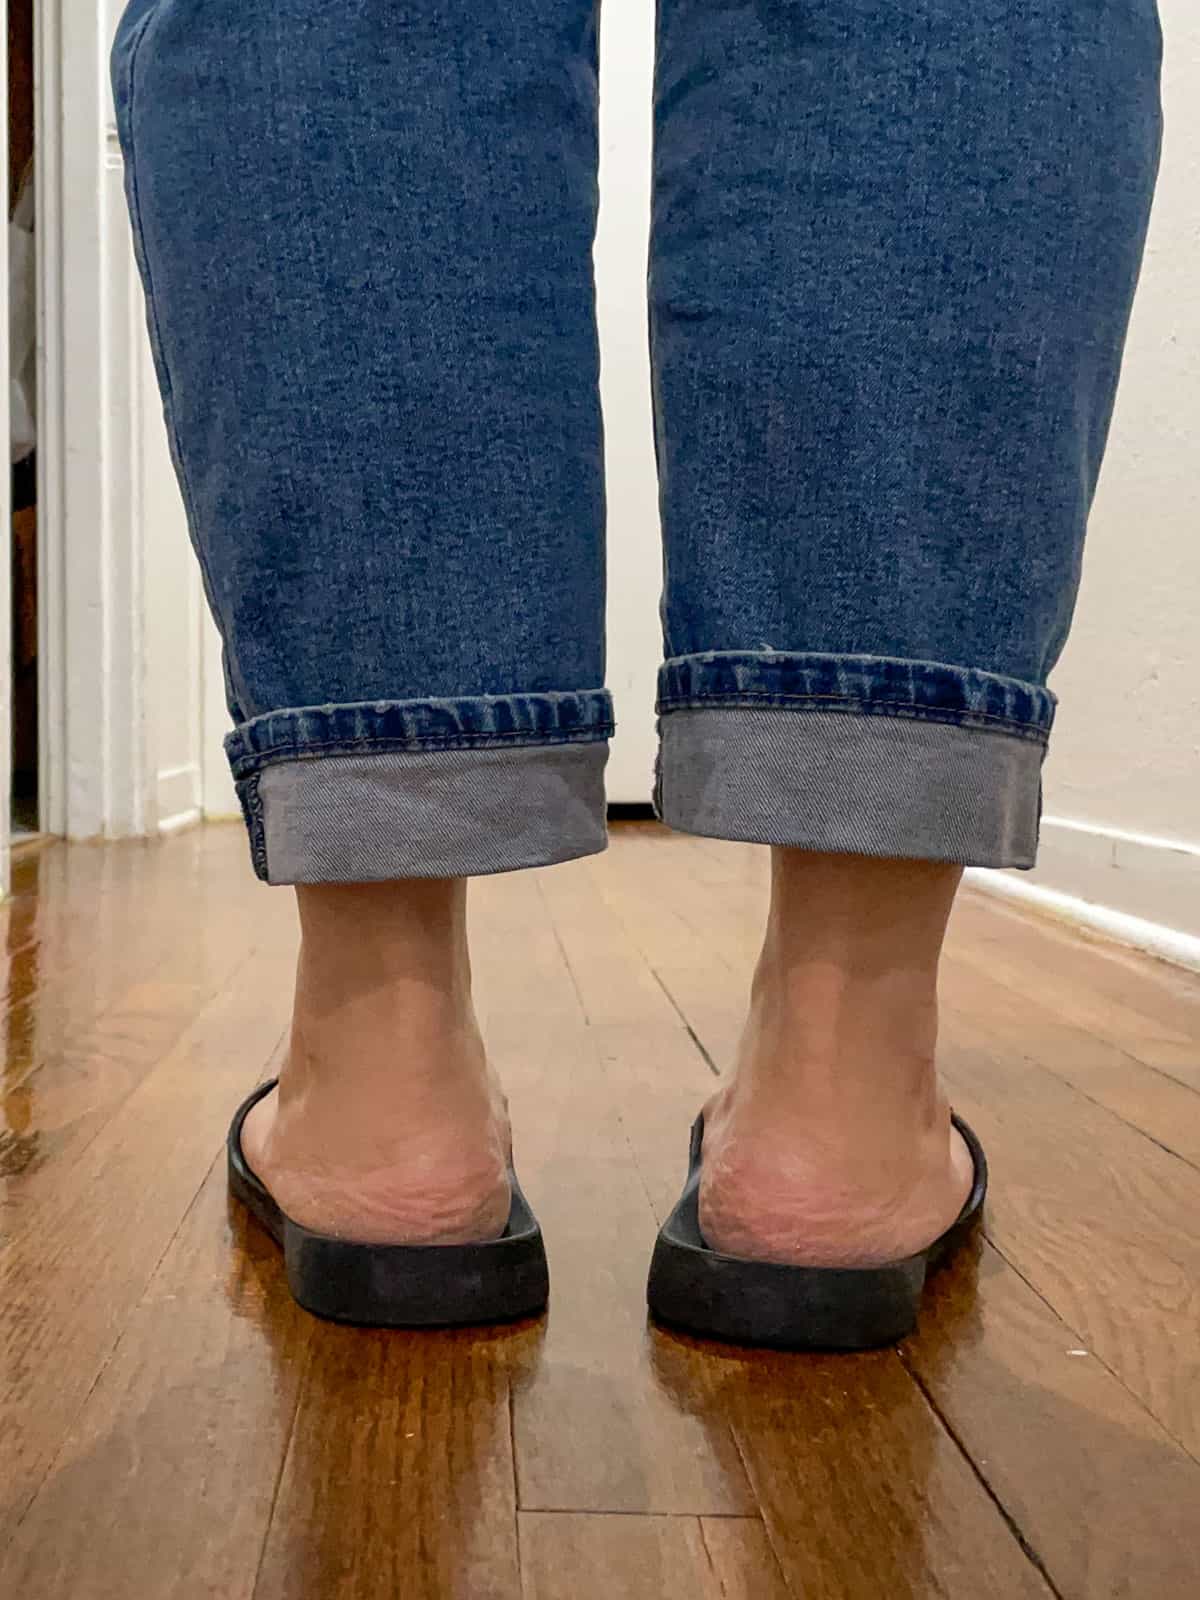 woman wearing jeans and Archie's black flip flops standing on a wooden floor inside